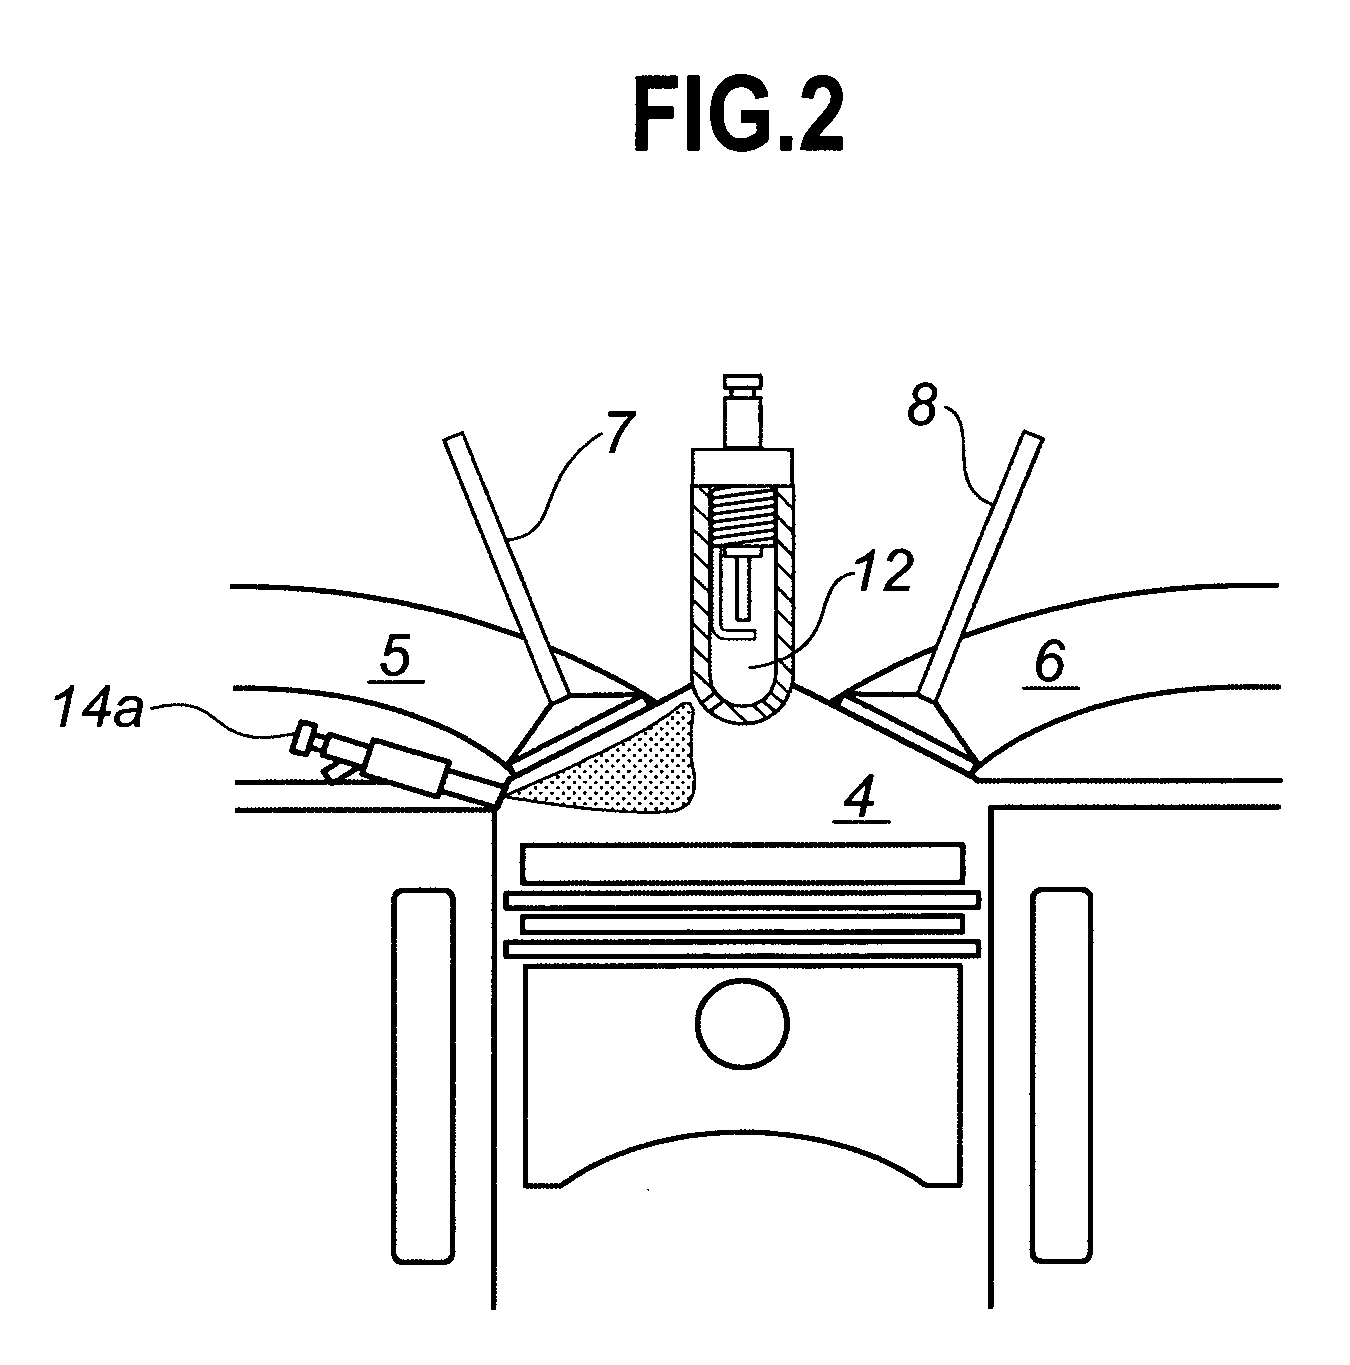 Internal combustion engine with a precombustion chamber